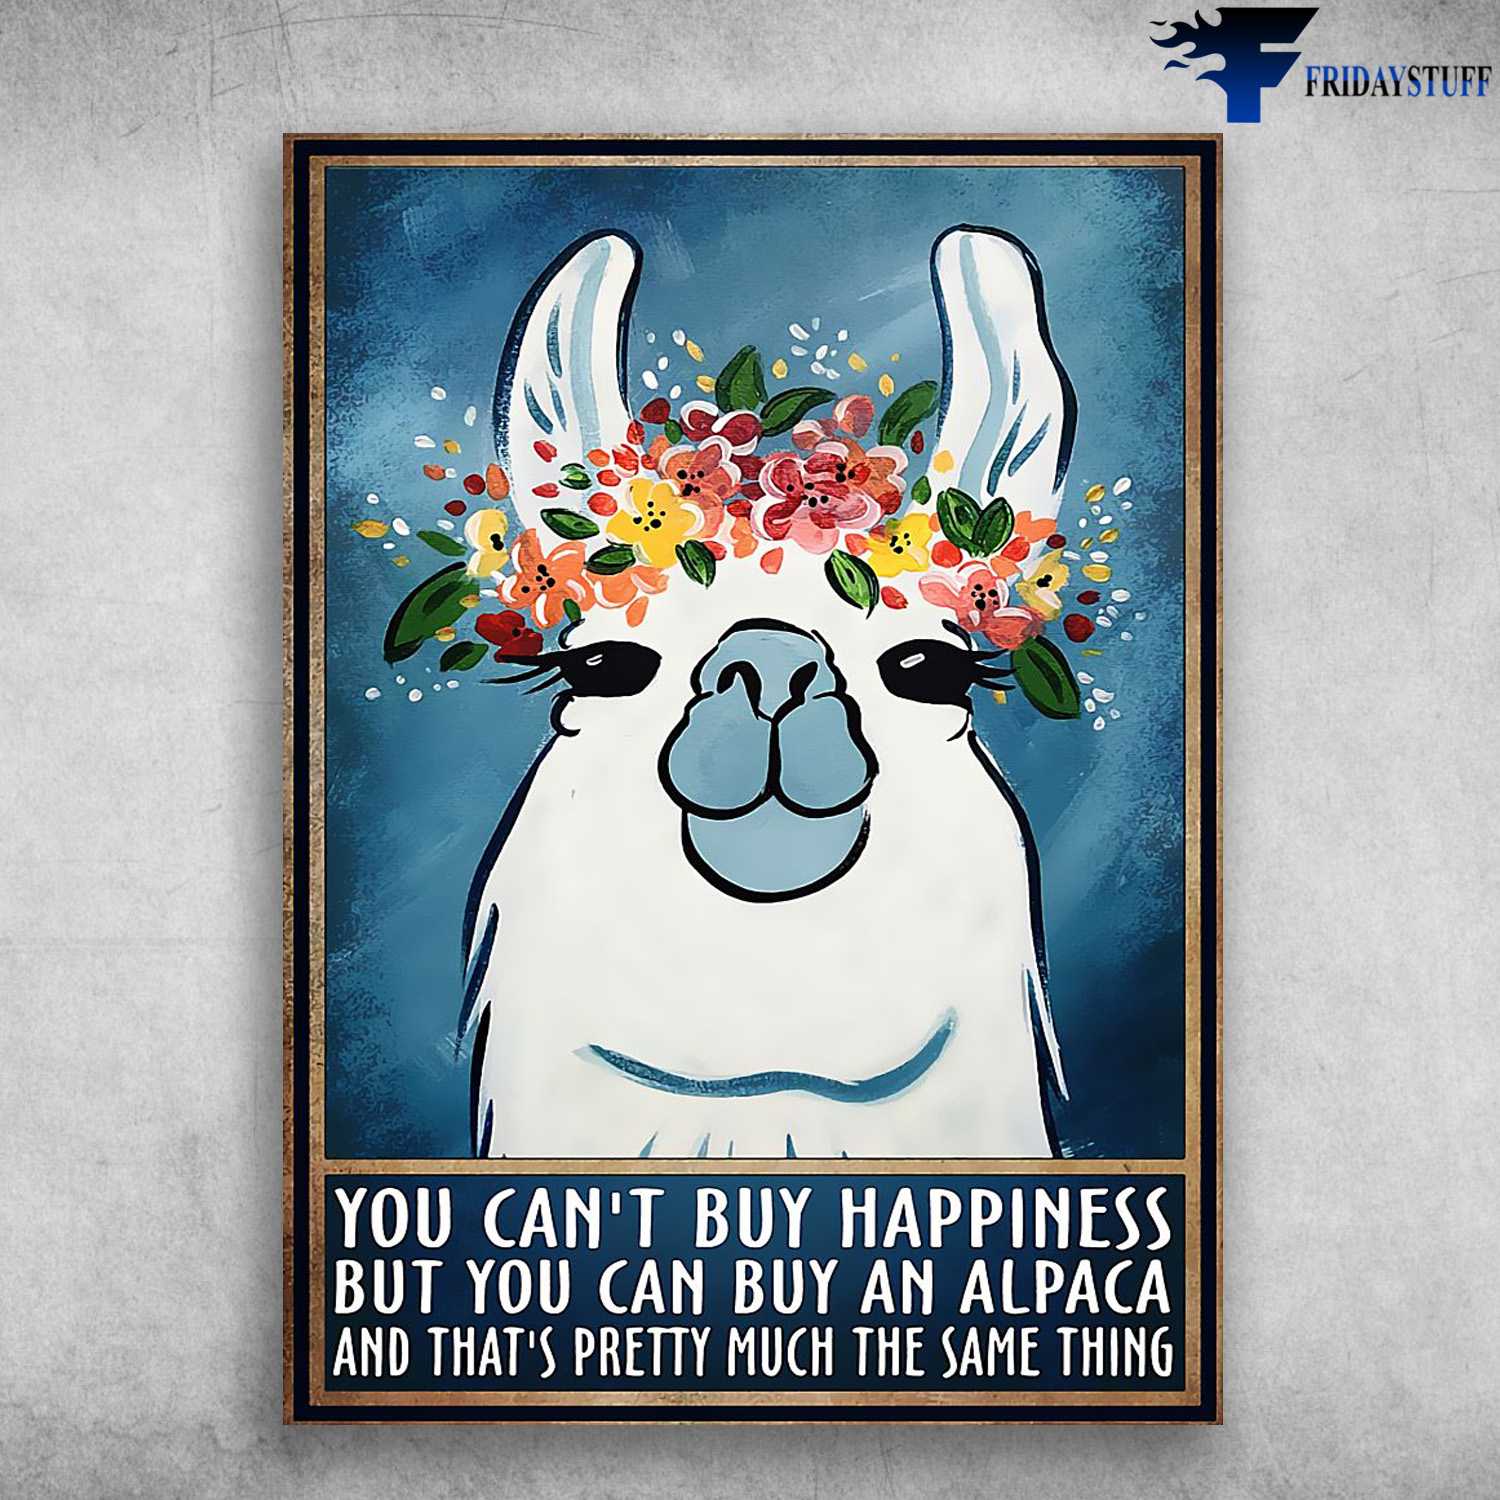 Cute Alpaca, Alpaca Poster, You Can't But Happiness, But You Can Buy An Alpaca, And That's Pretty Much The Same Thing